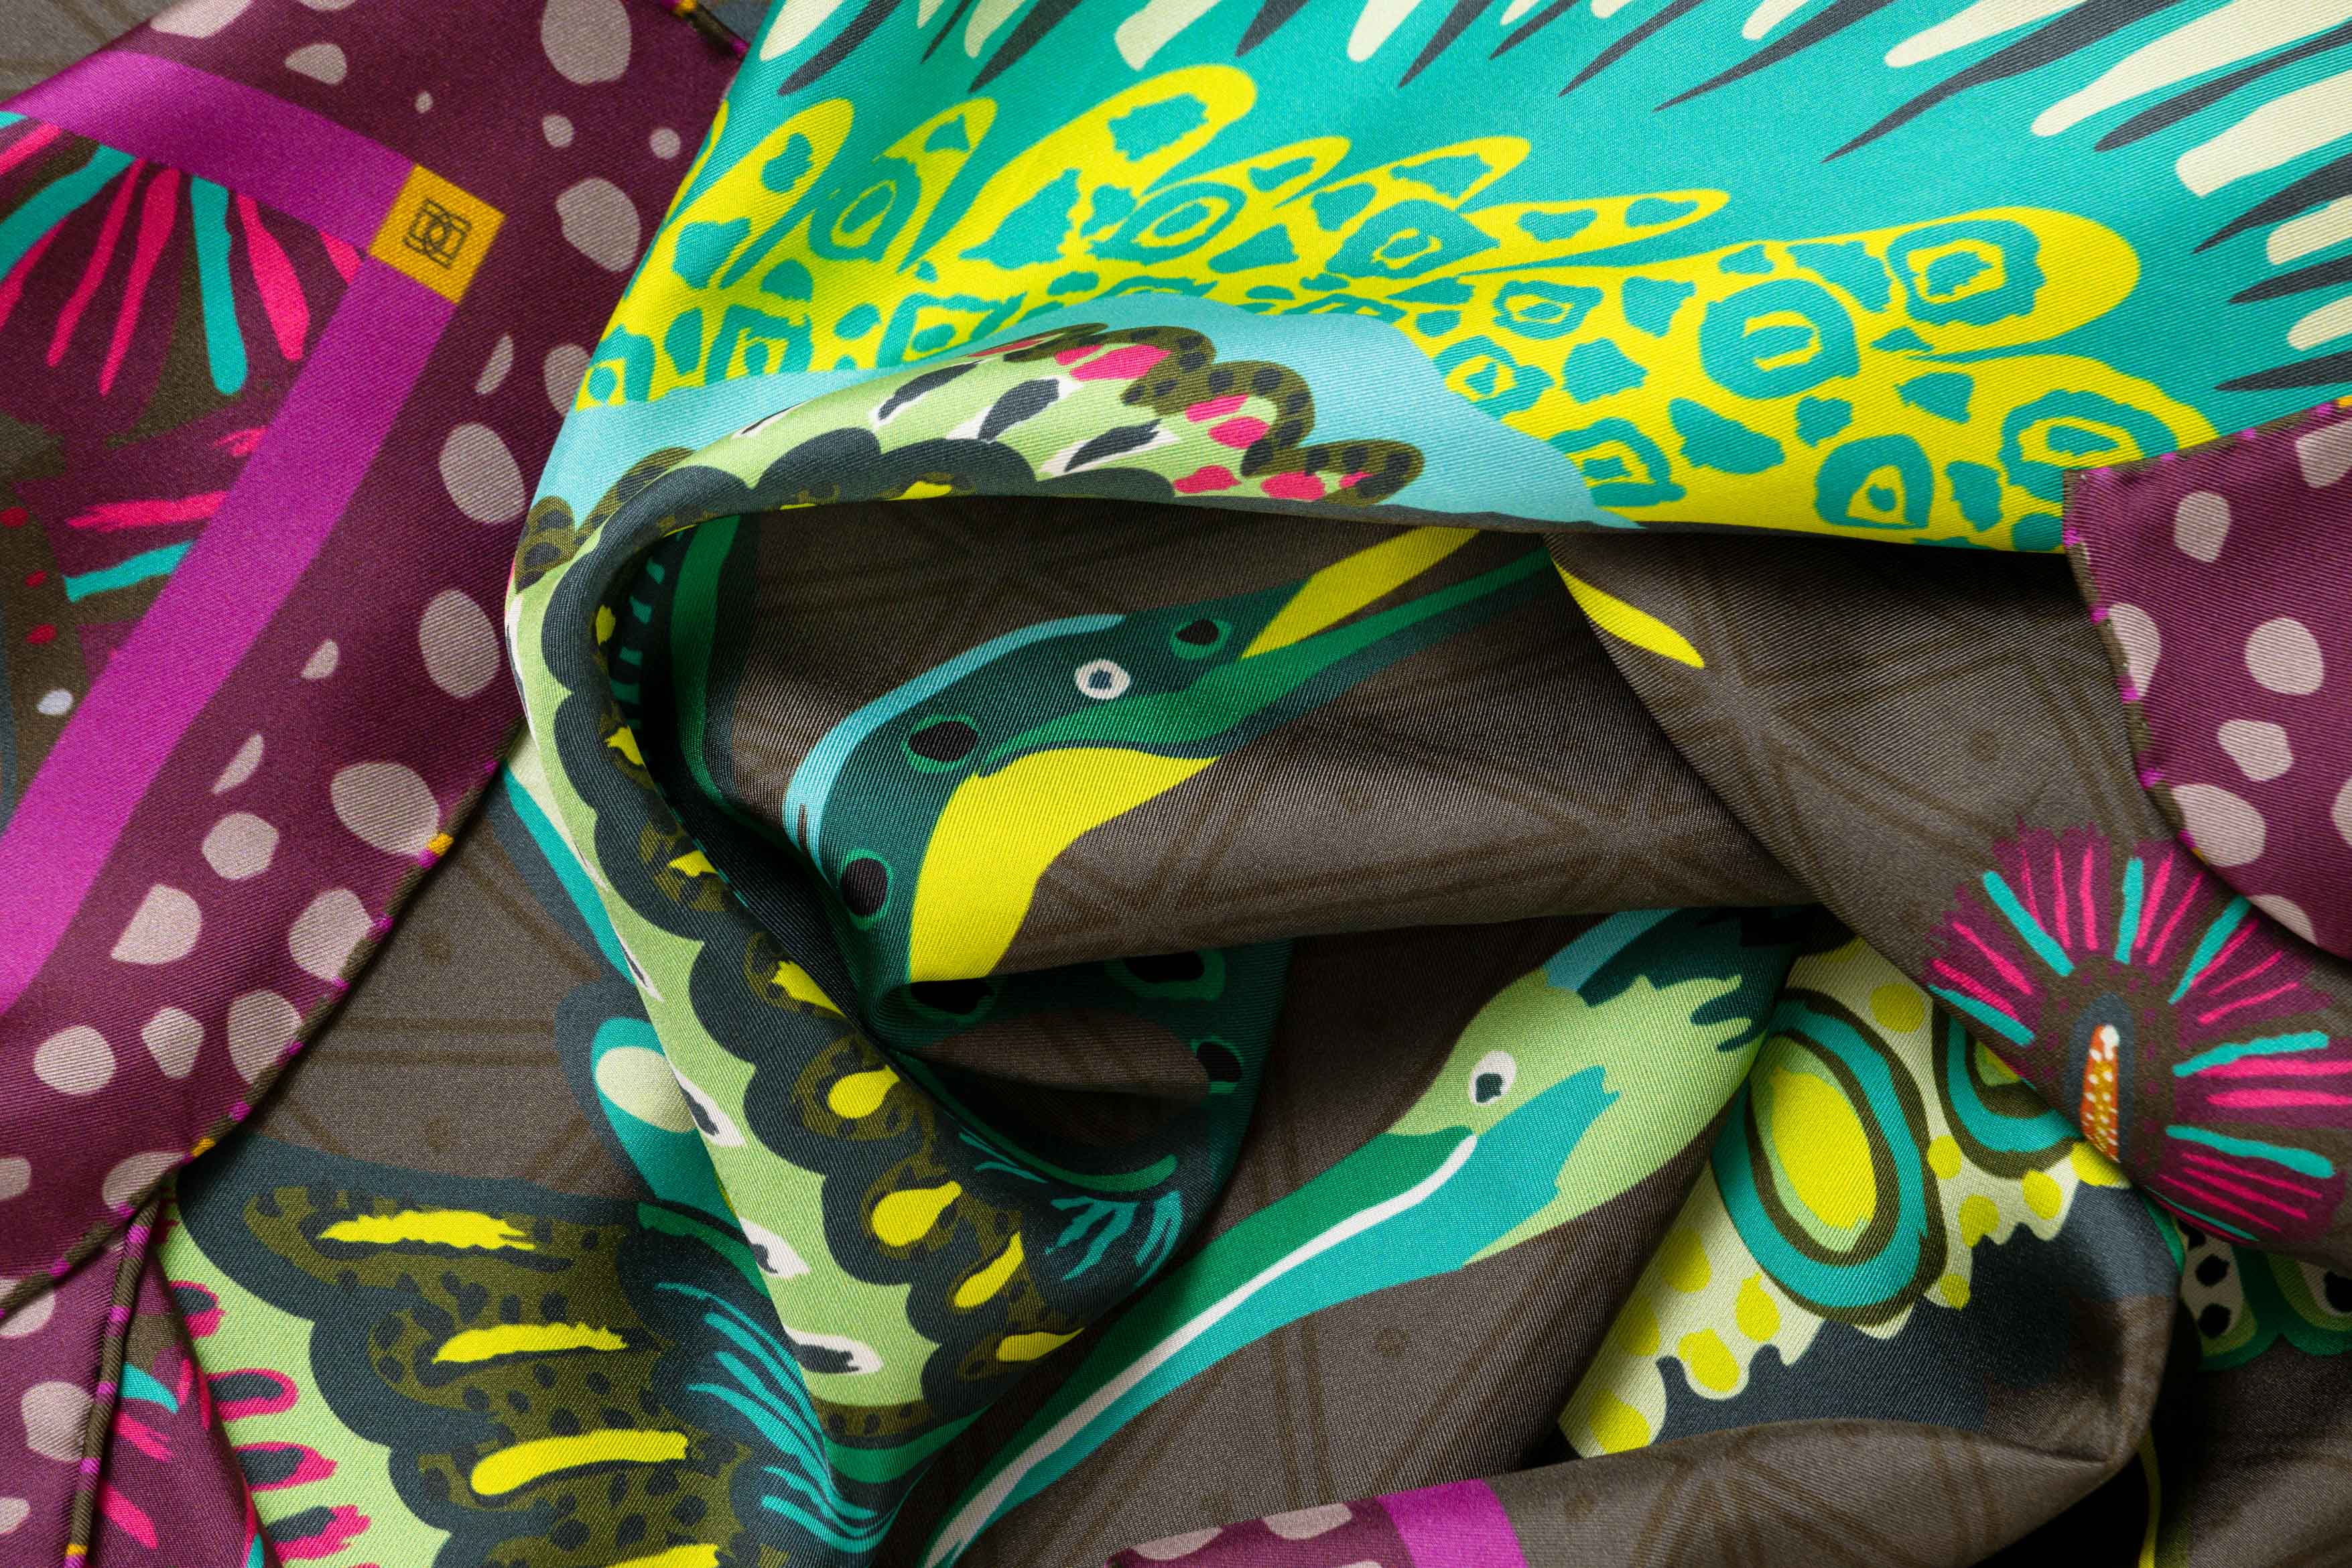 Close-up image of 100% silk square scarf featuring a motif of two large-scale cranes with brightly colored wings in shades of blue and green with geometric designs. The scarf’s center background is a tonal army green and the border features irregular grey polka dots on a magenta background. Illustrates the lightly ridged texture of the silk twill along with the rich color tones and luminous nature of the silk scarf.